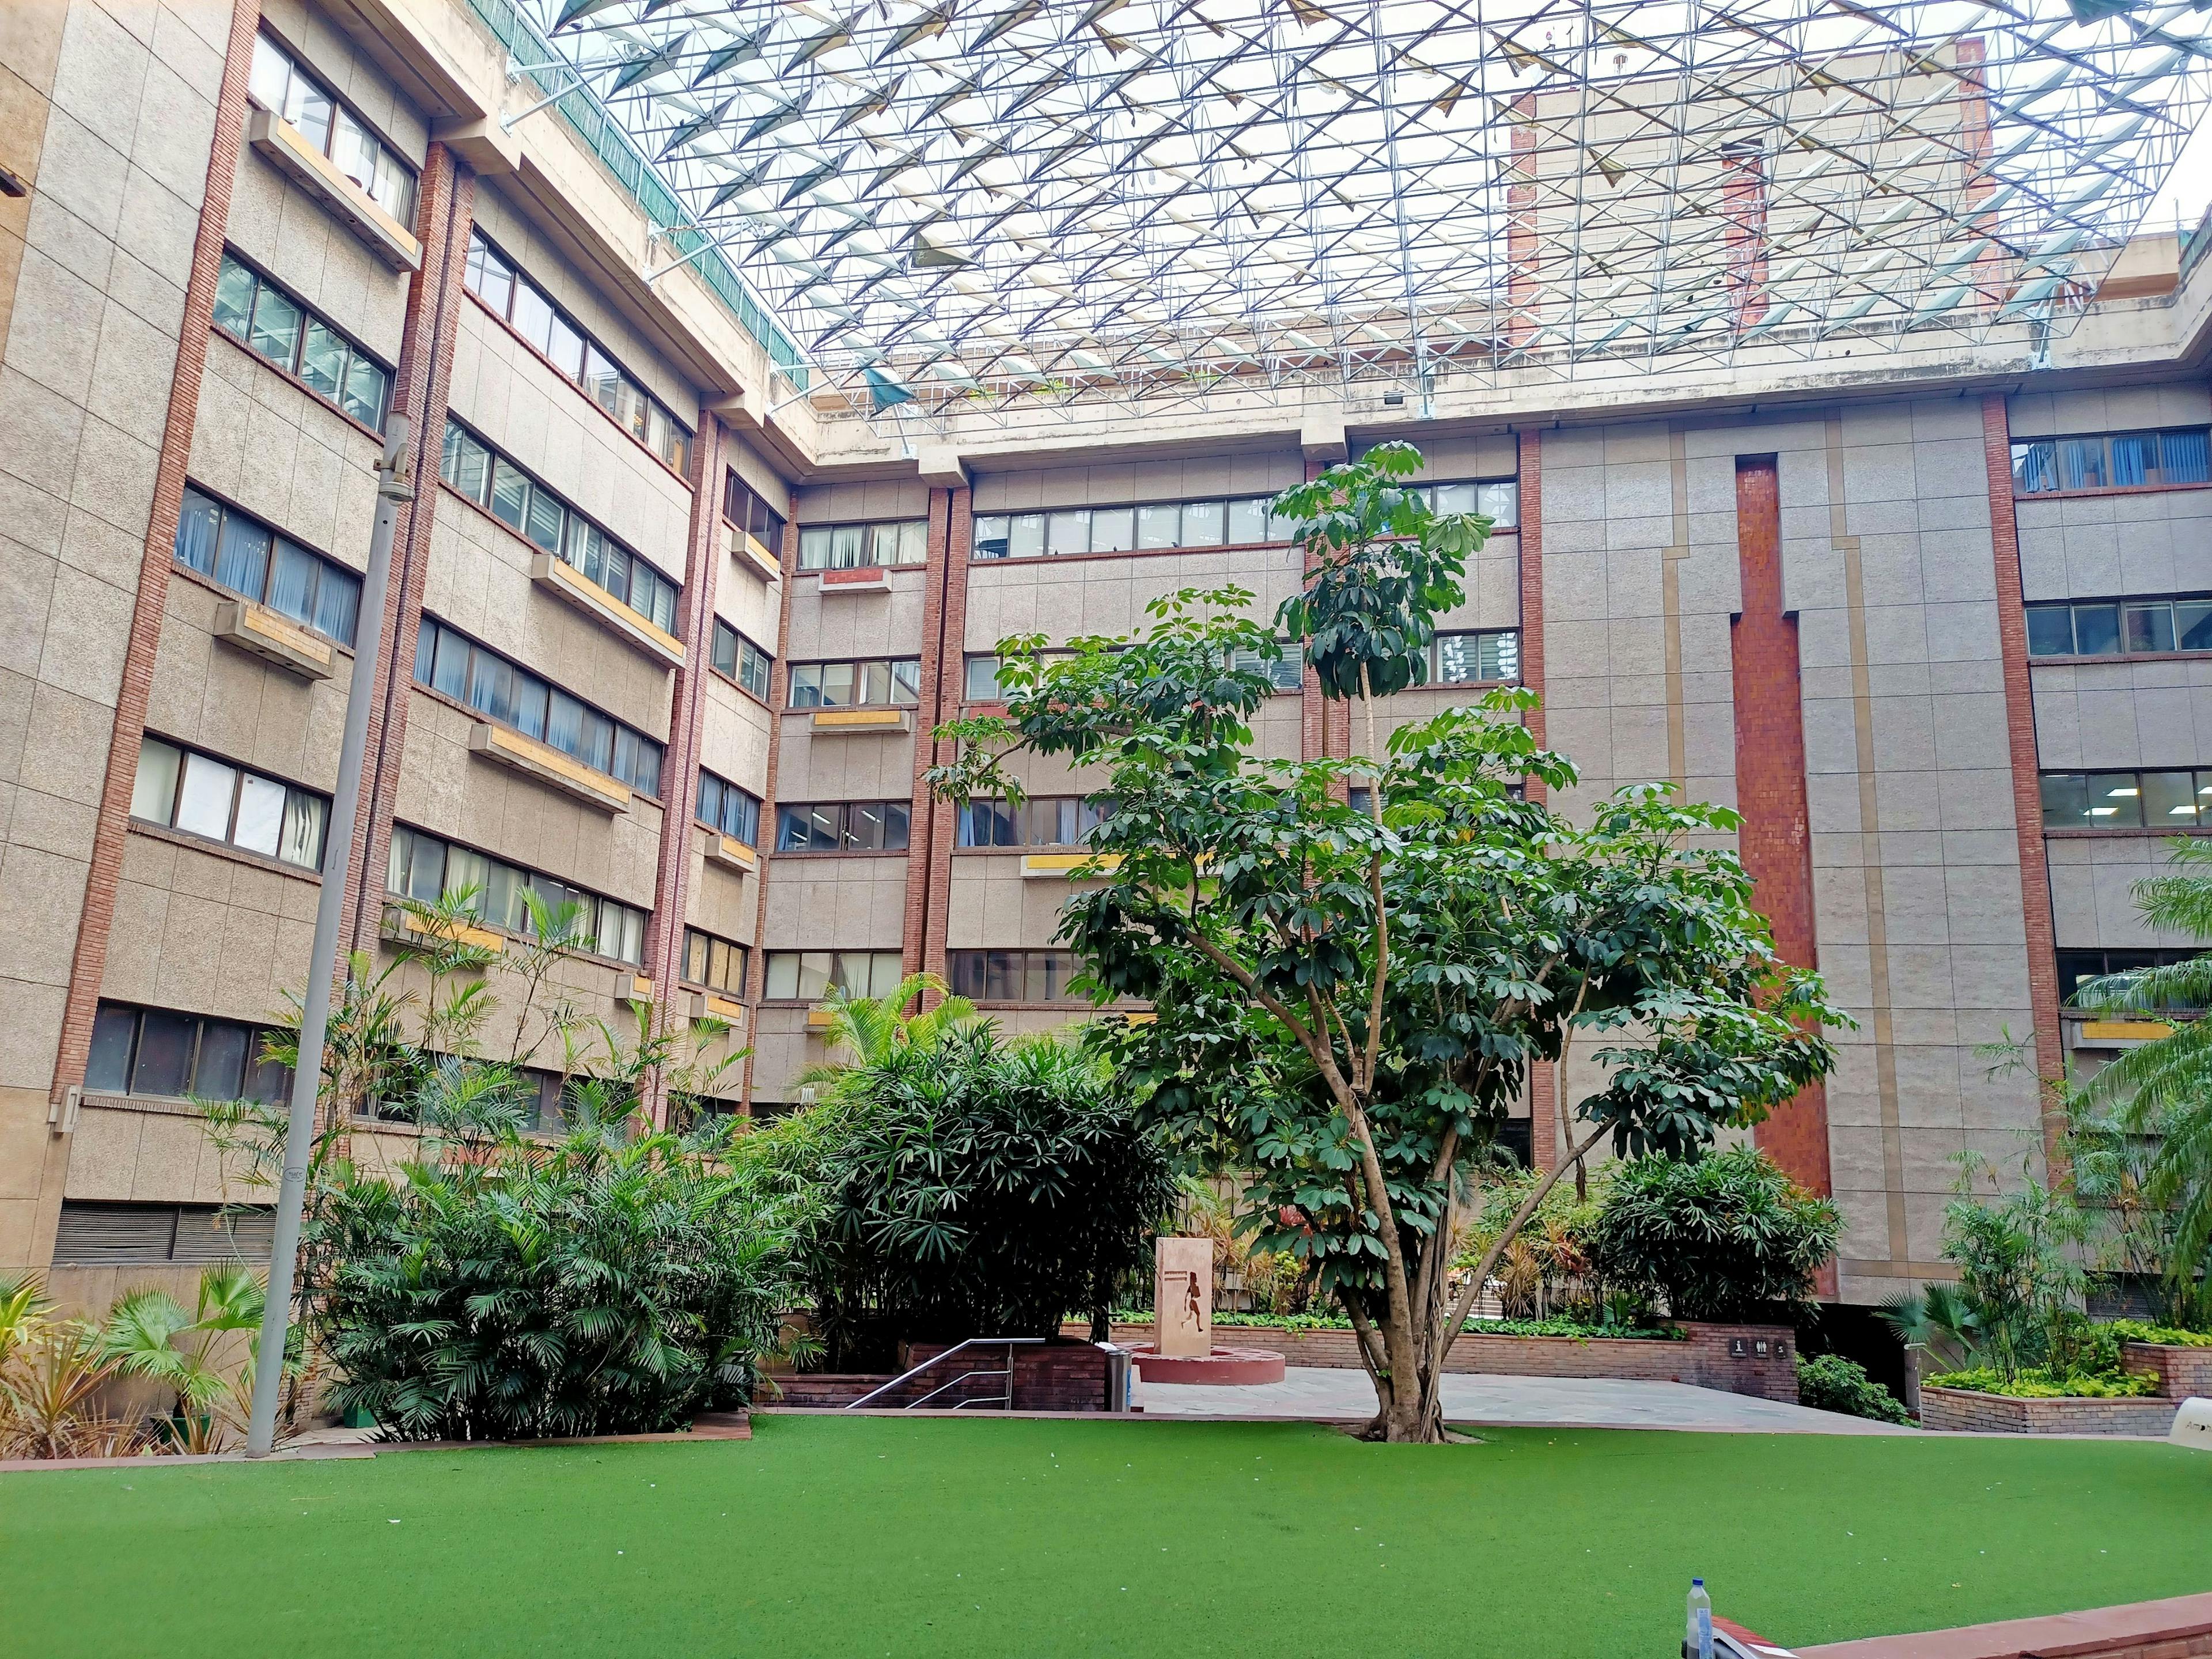 India Habitat Centre and its famous tiled roof